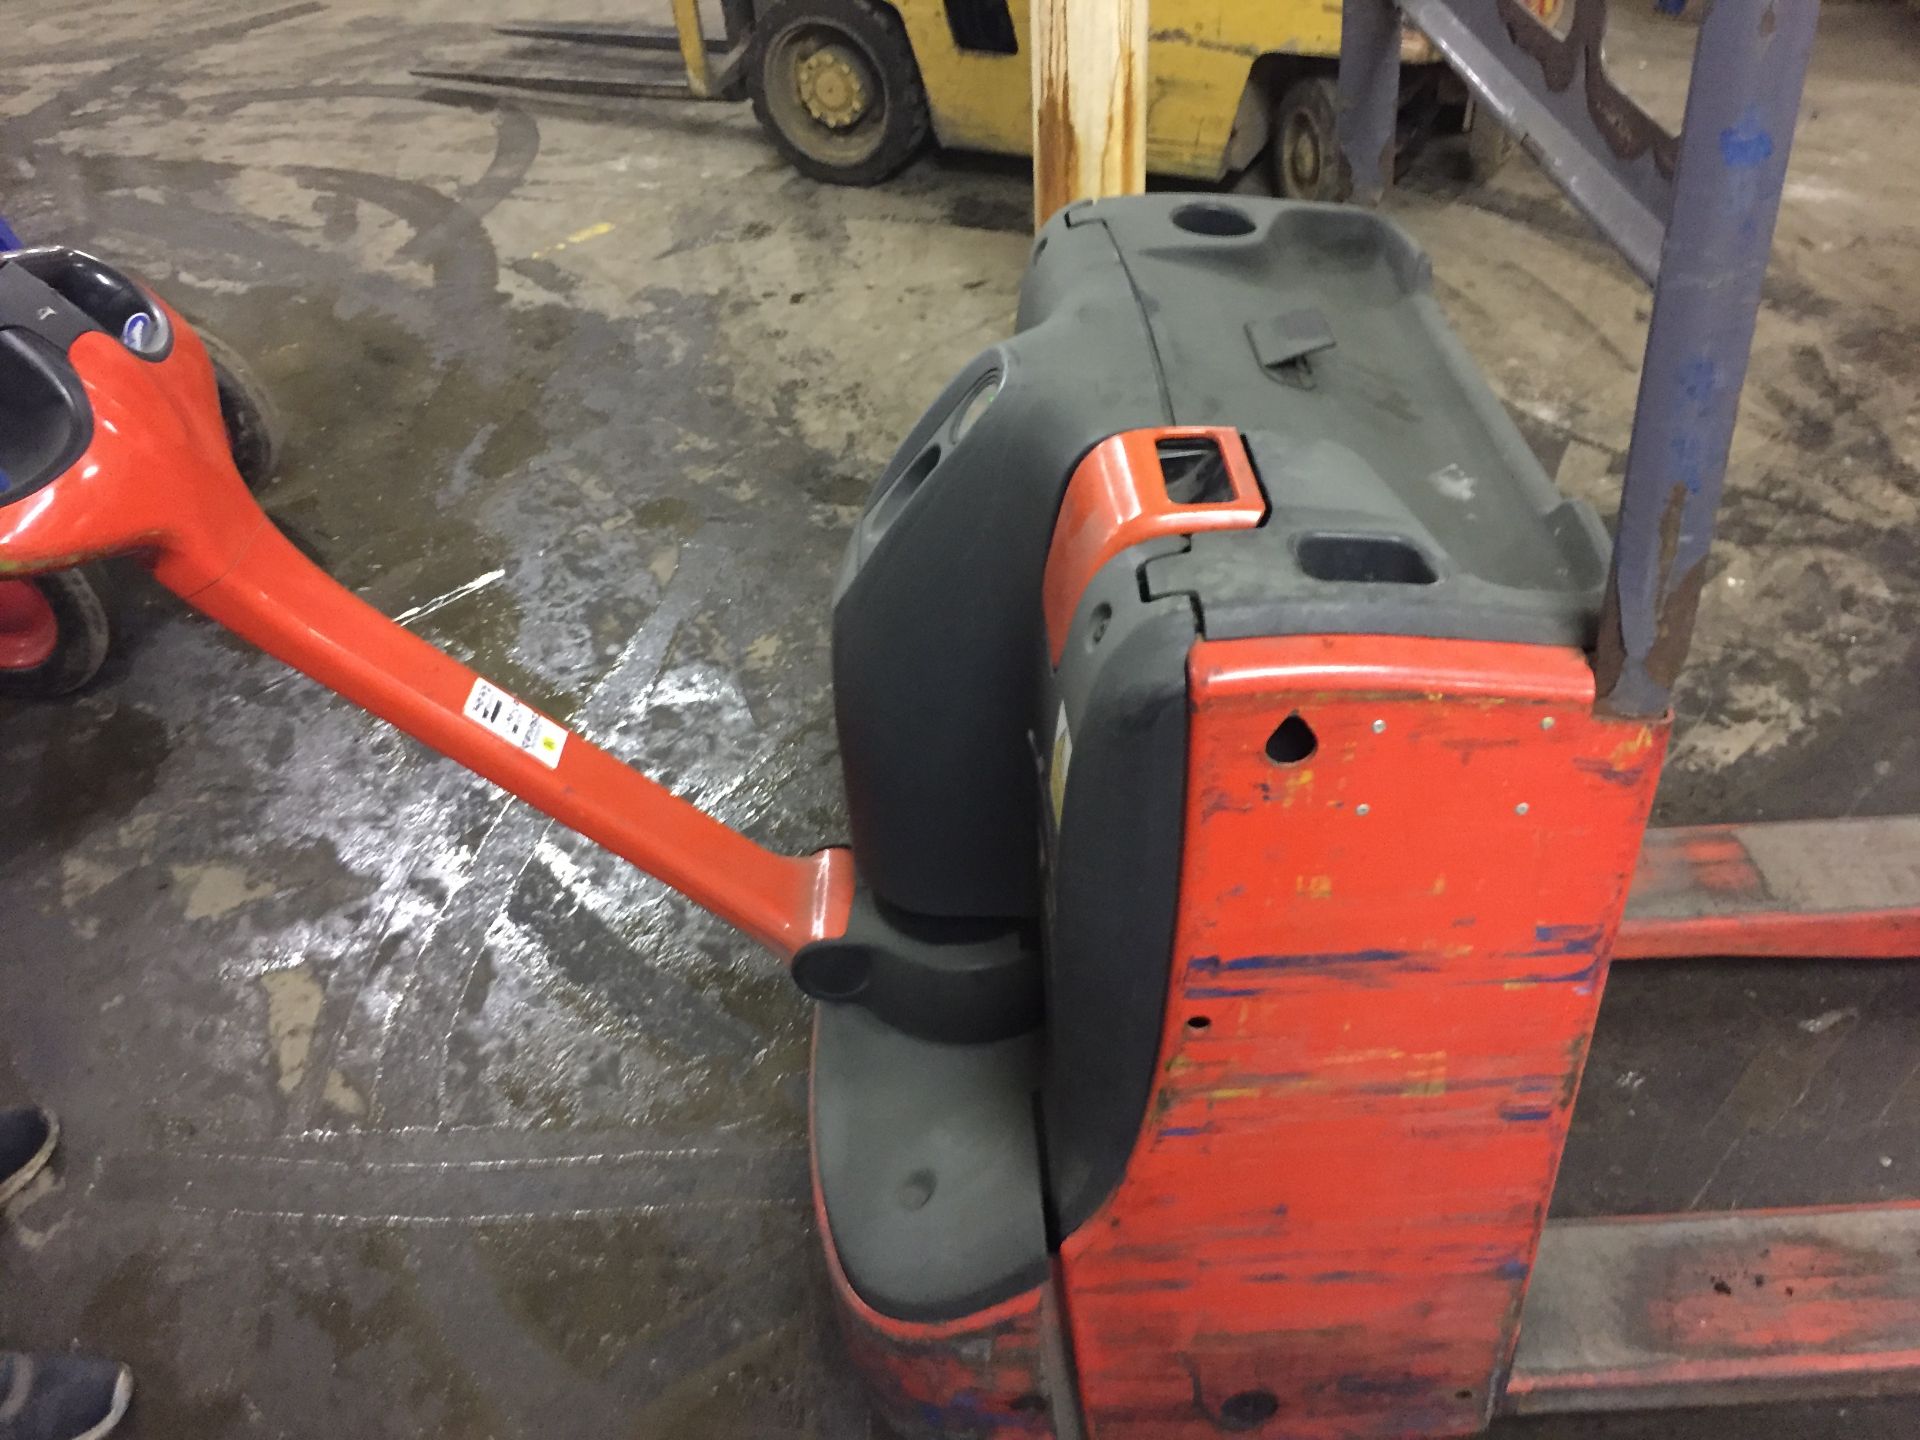 1 x Linde T20 Electric Pallet Truck - Tested and Working - Includes Key and Charger - CL007 - Ref: - Image 5 of 6